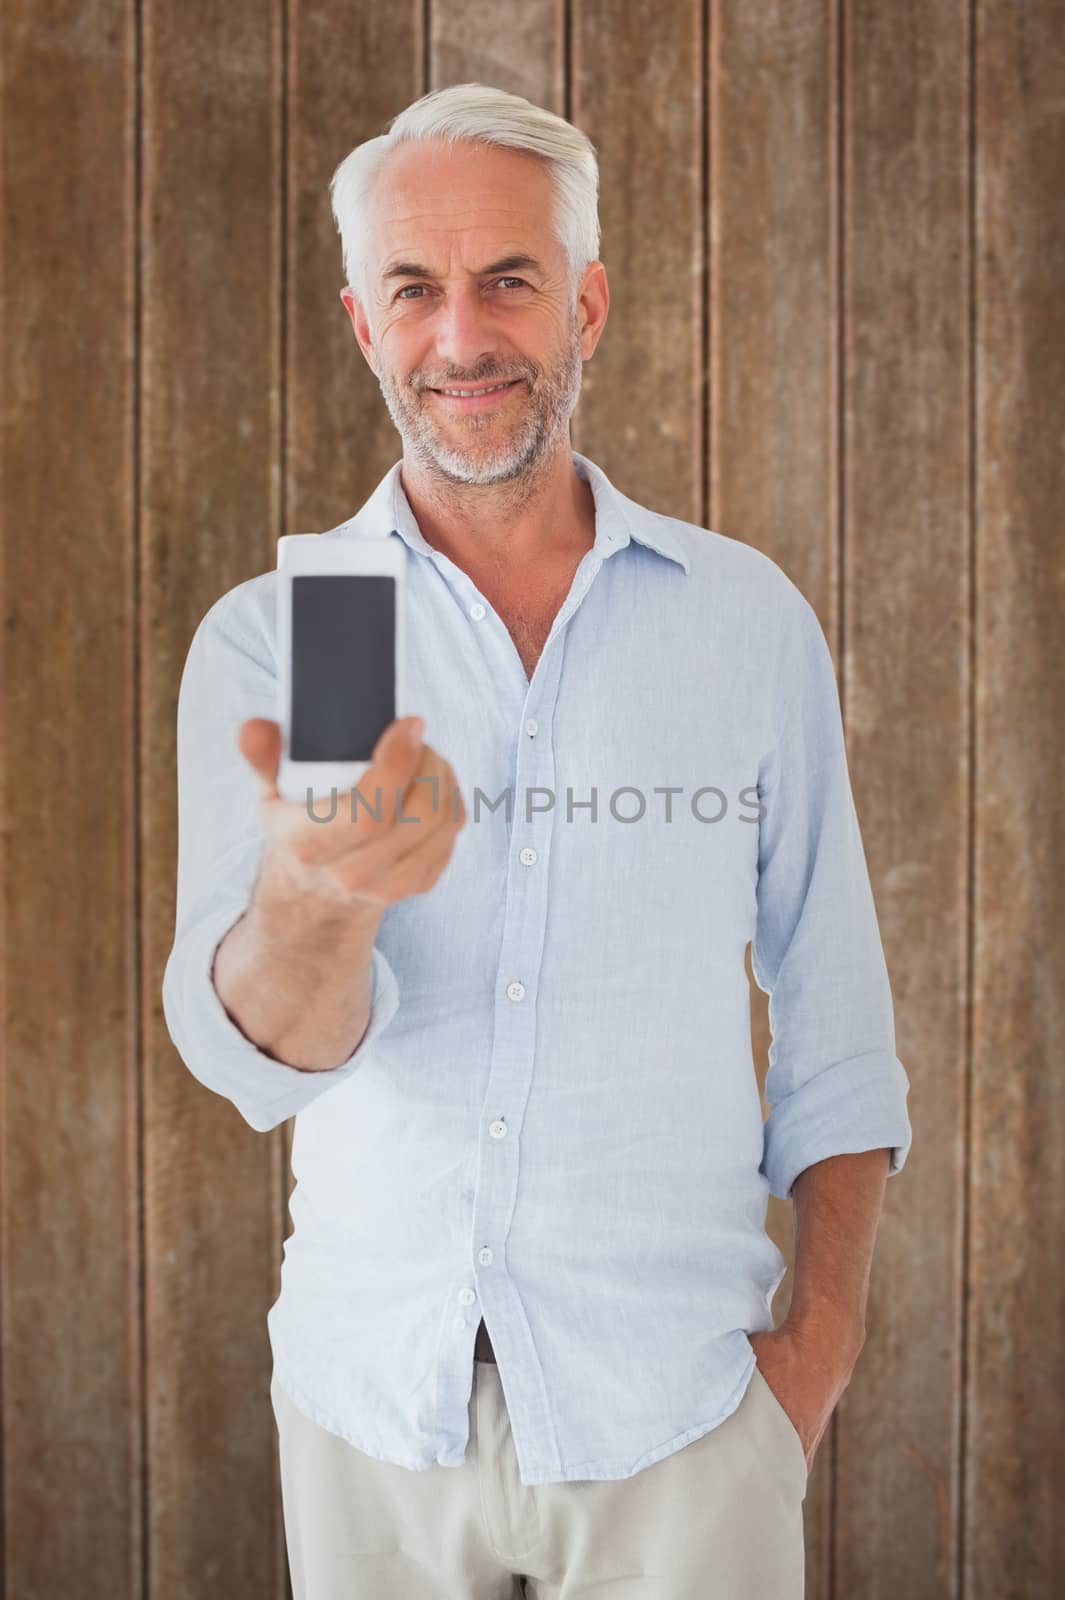 Smiling man showing smartphone to camera against wooden planks background